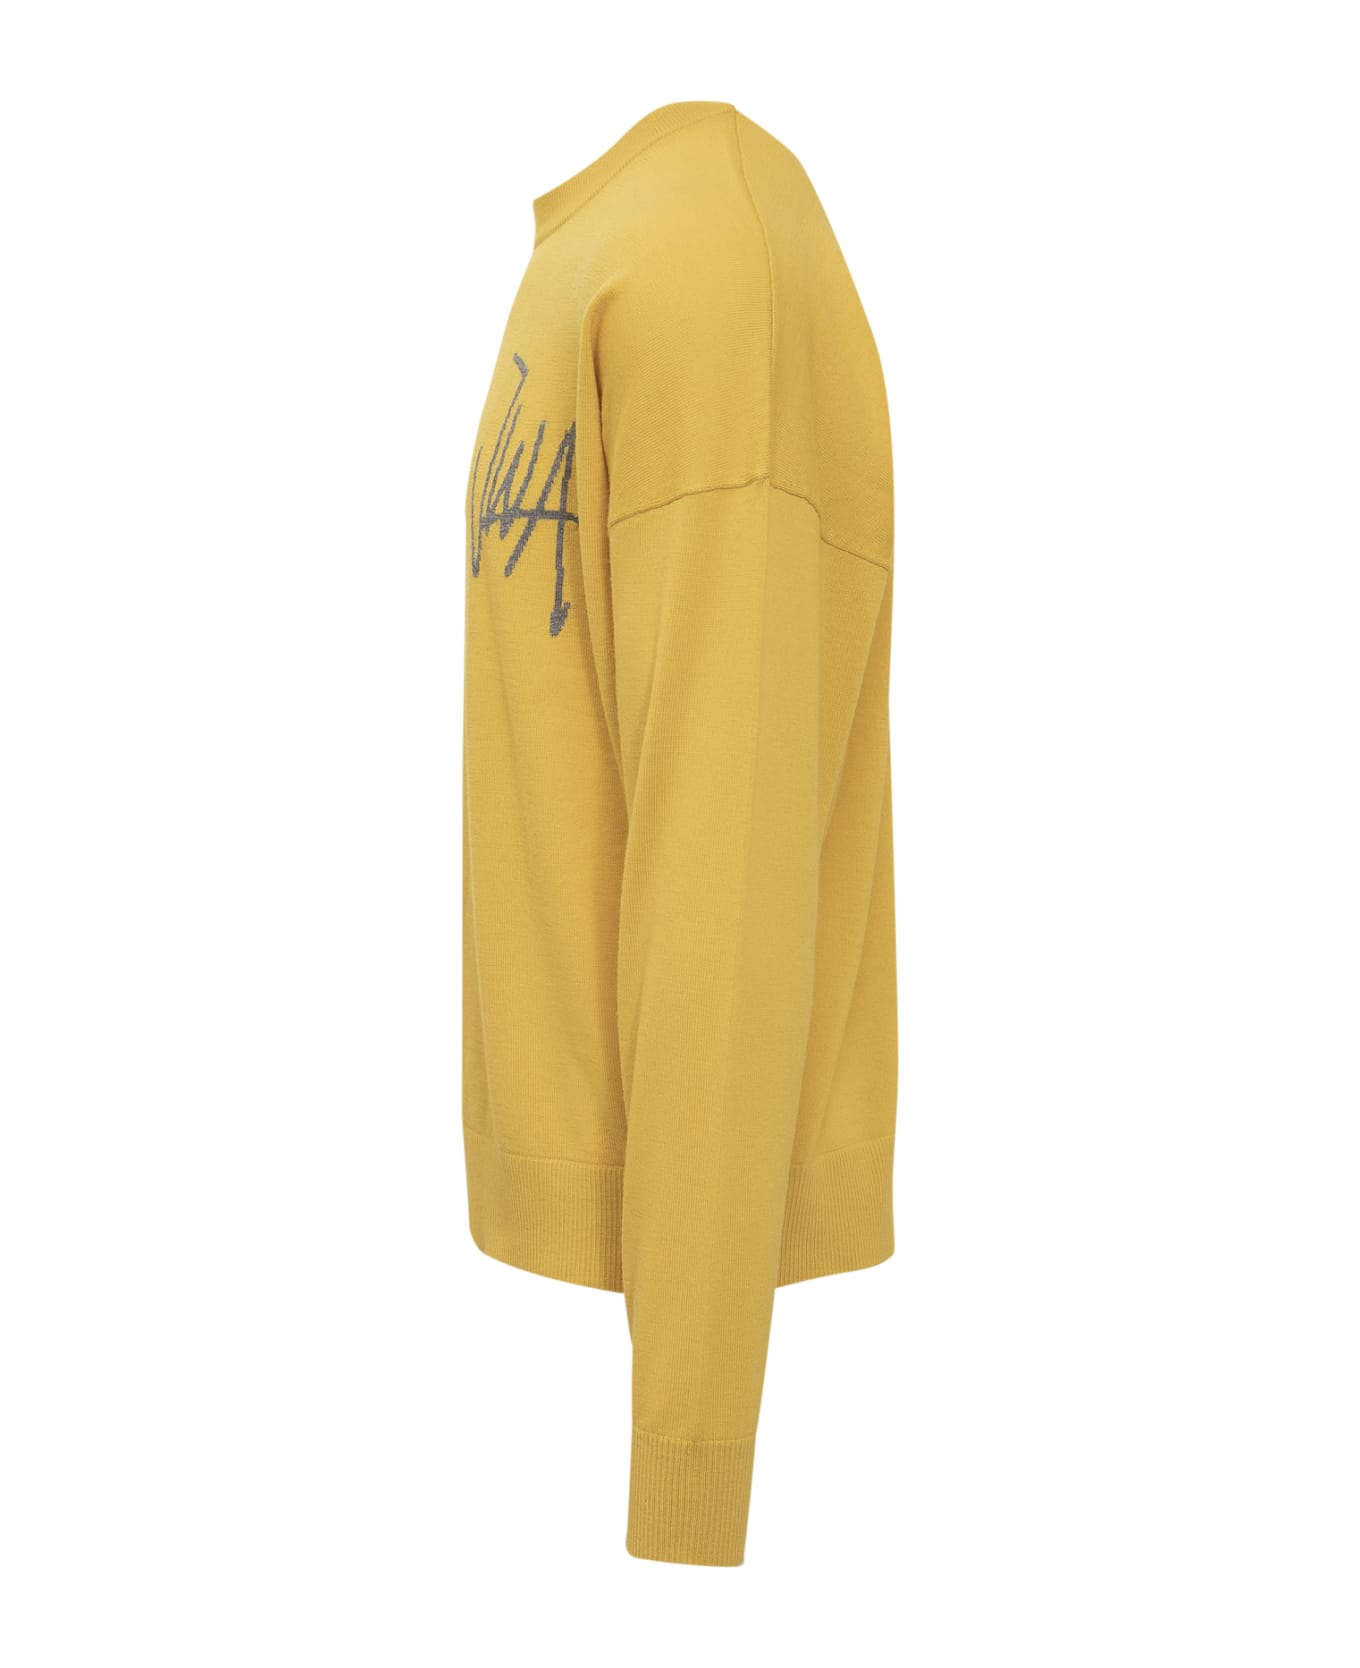 J.W. Anderson Sweater With Logo - YELLOW/GREY MELANGE